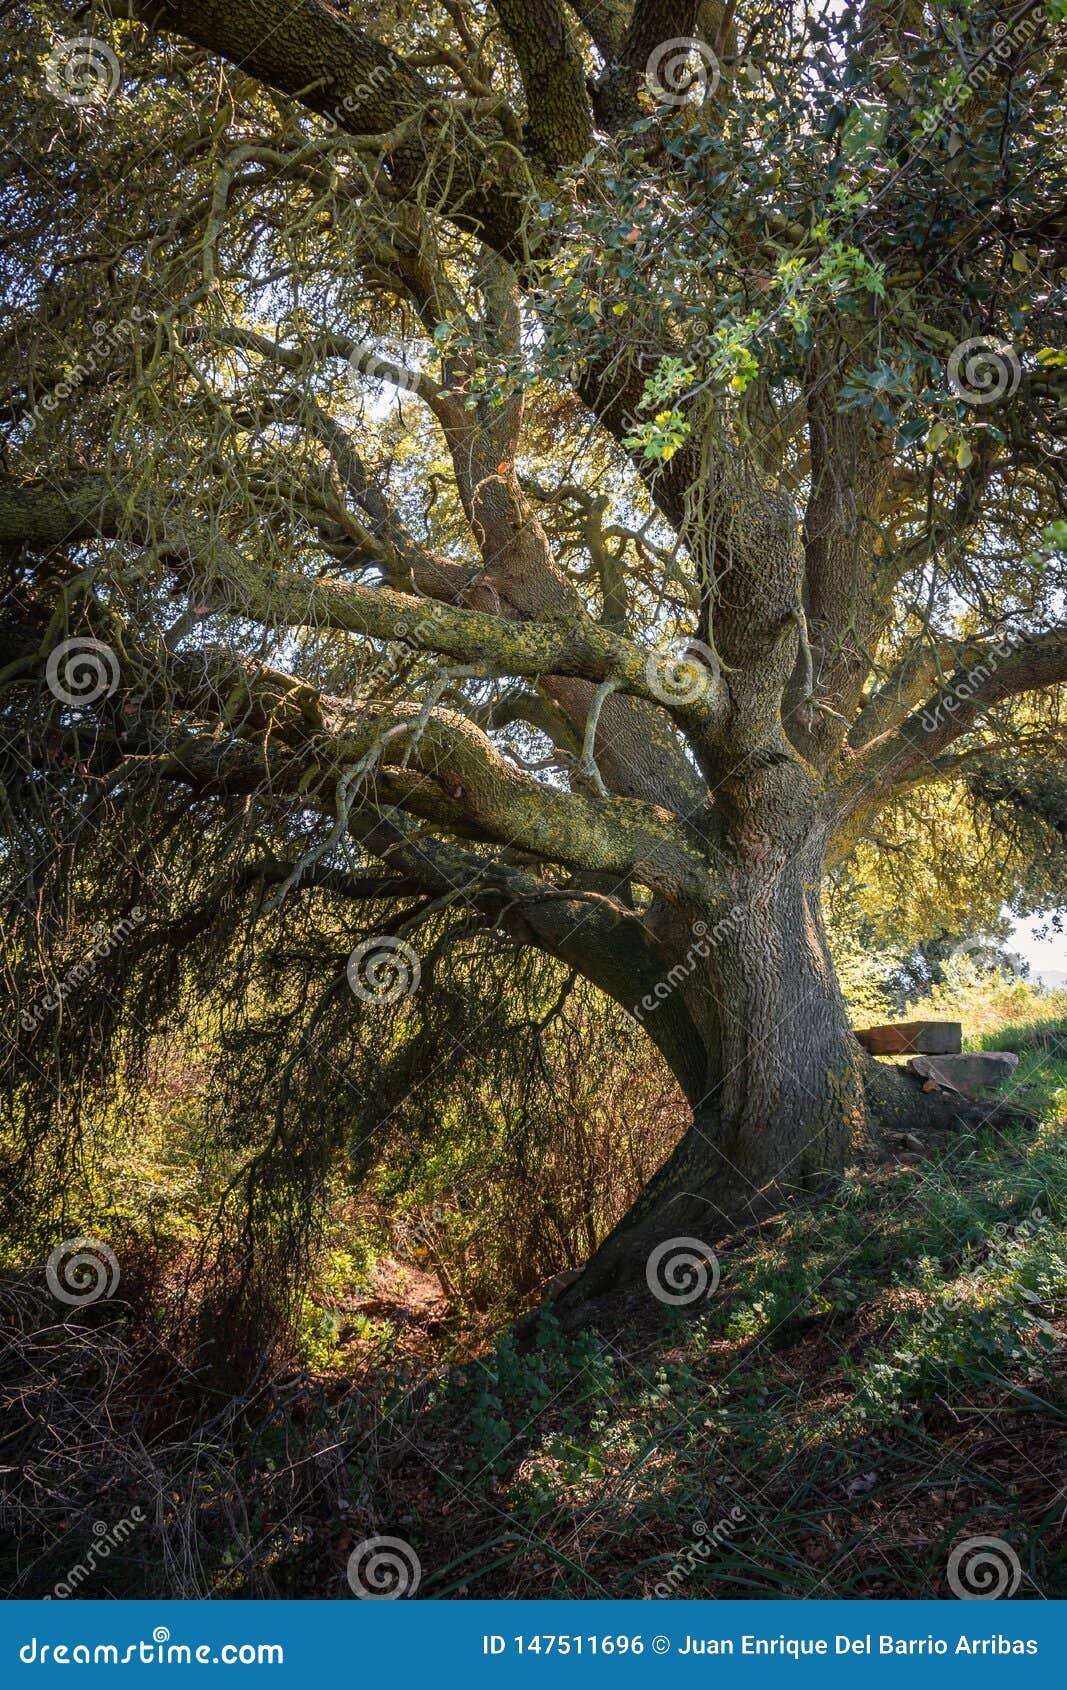 millenary oak in the province of segovia in the small town of madriguera spain